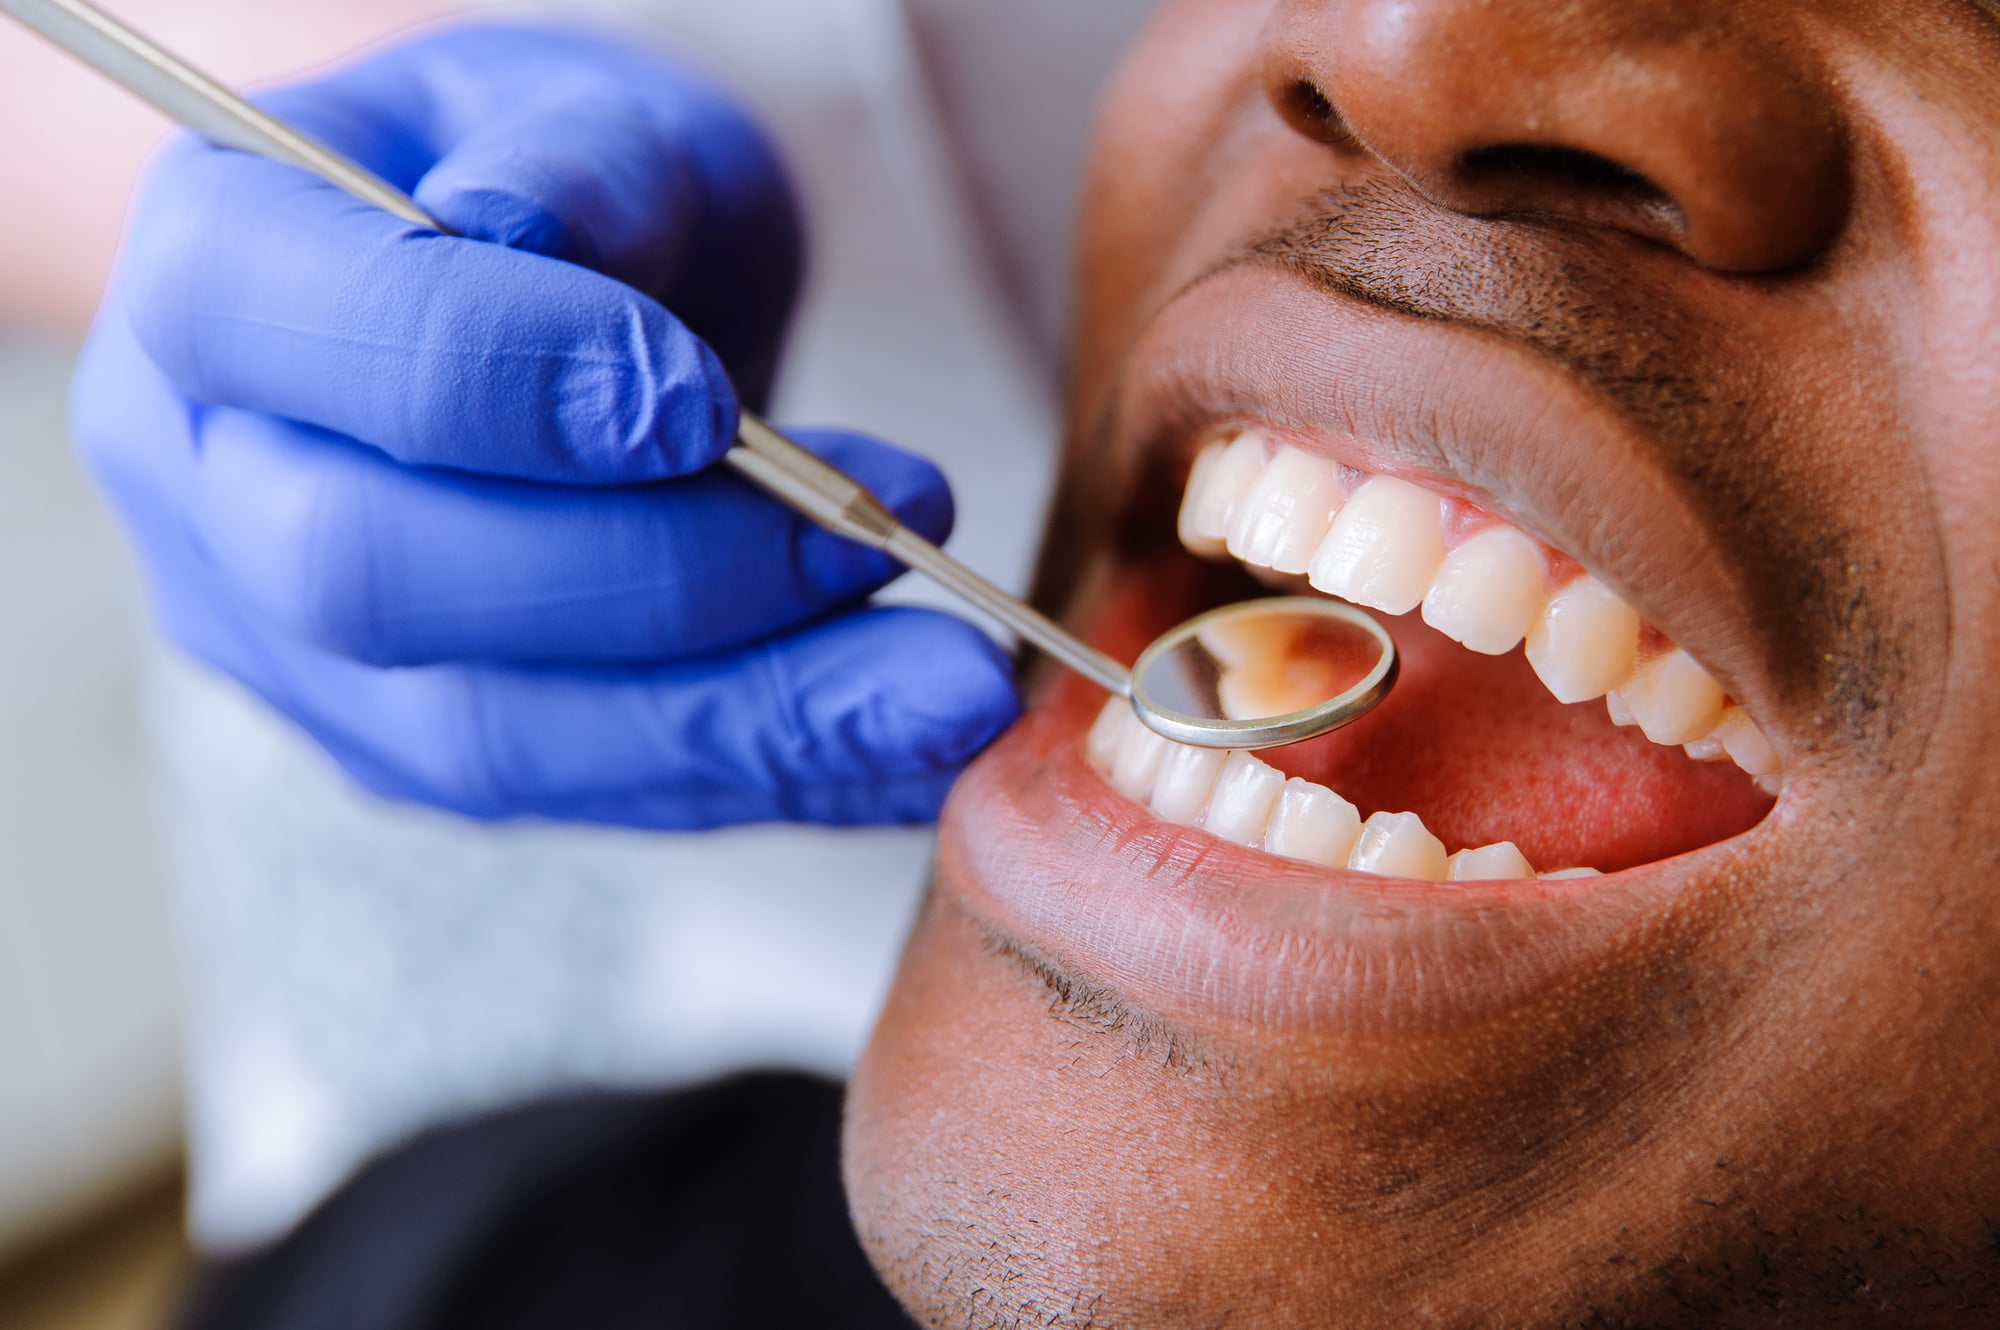 Many dental procedures can leave you in pain, but you can do several things for a quick recovery. Learn how to recover fast here!